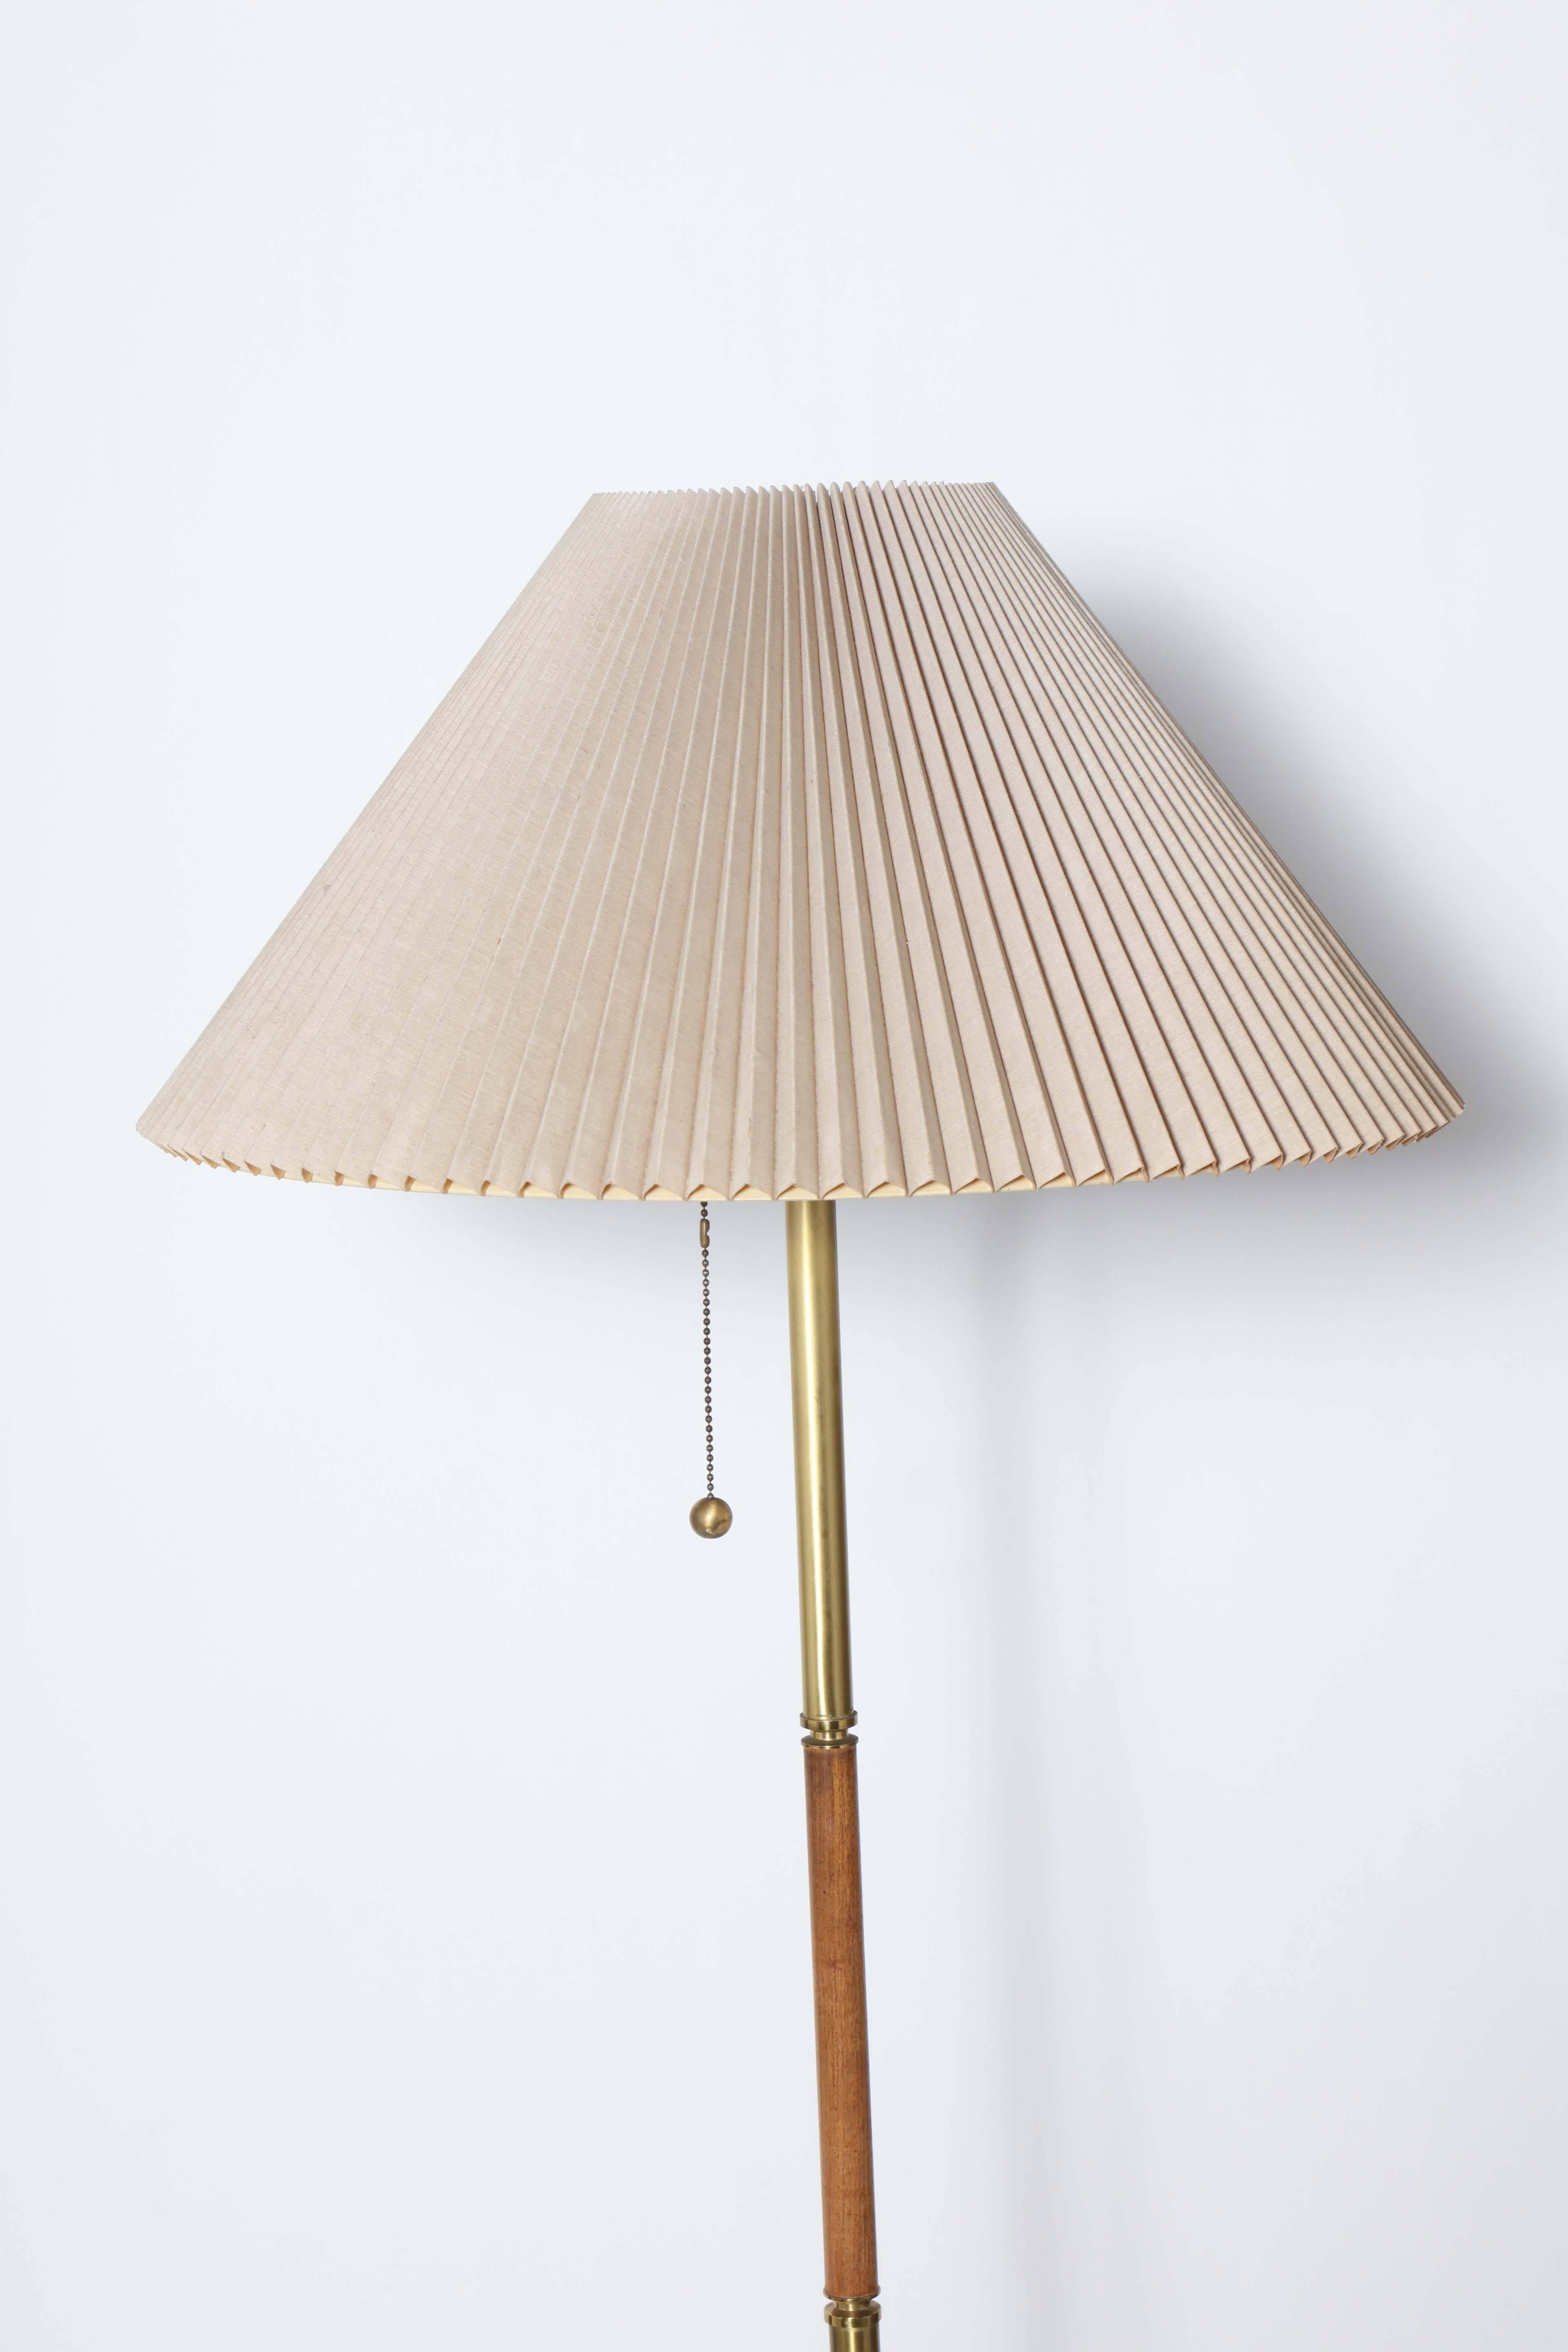 American Mid Century Gerald Thurston for Lightolier Brass, Teak and Marble Reading Floor Lamp. Featuring a Brass stem, Teak handle and round White Carrara Marble base. Three sockets. Shown with Taupe pleated accordion Shade for size only  (13.5H x